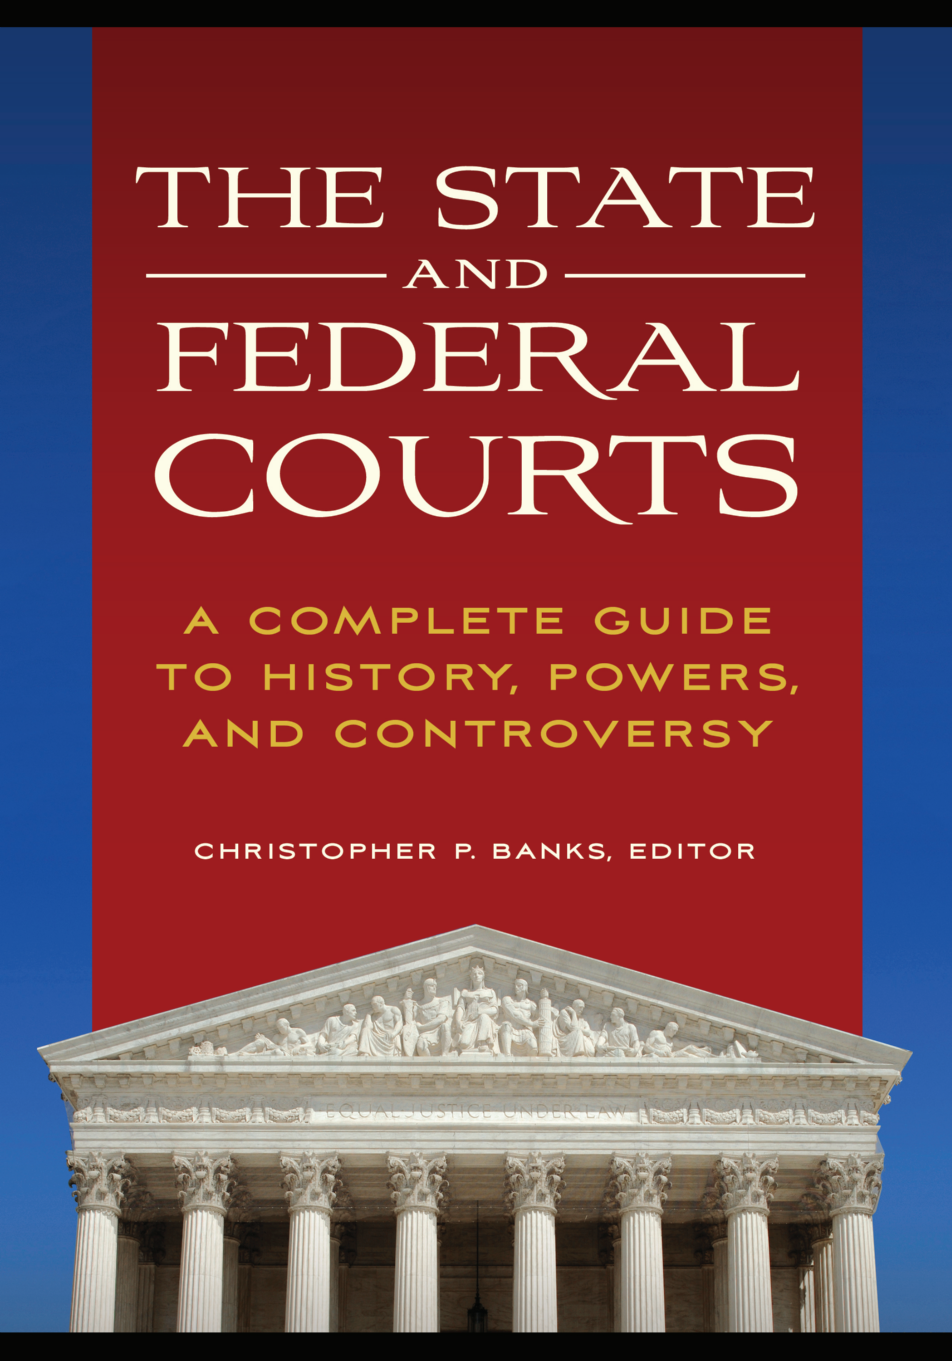 The State and Federal Courts: A Complete Guide to History, Powers, and Controversy page Cover1